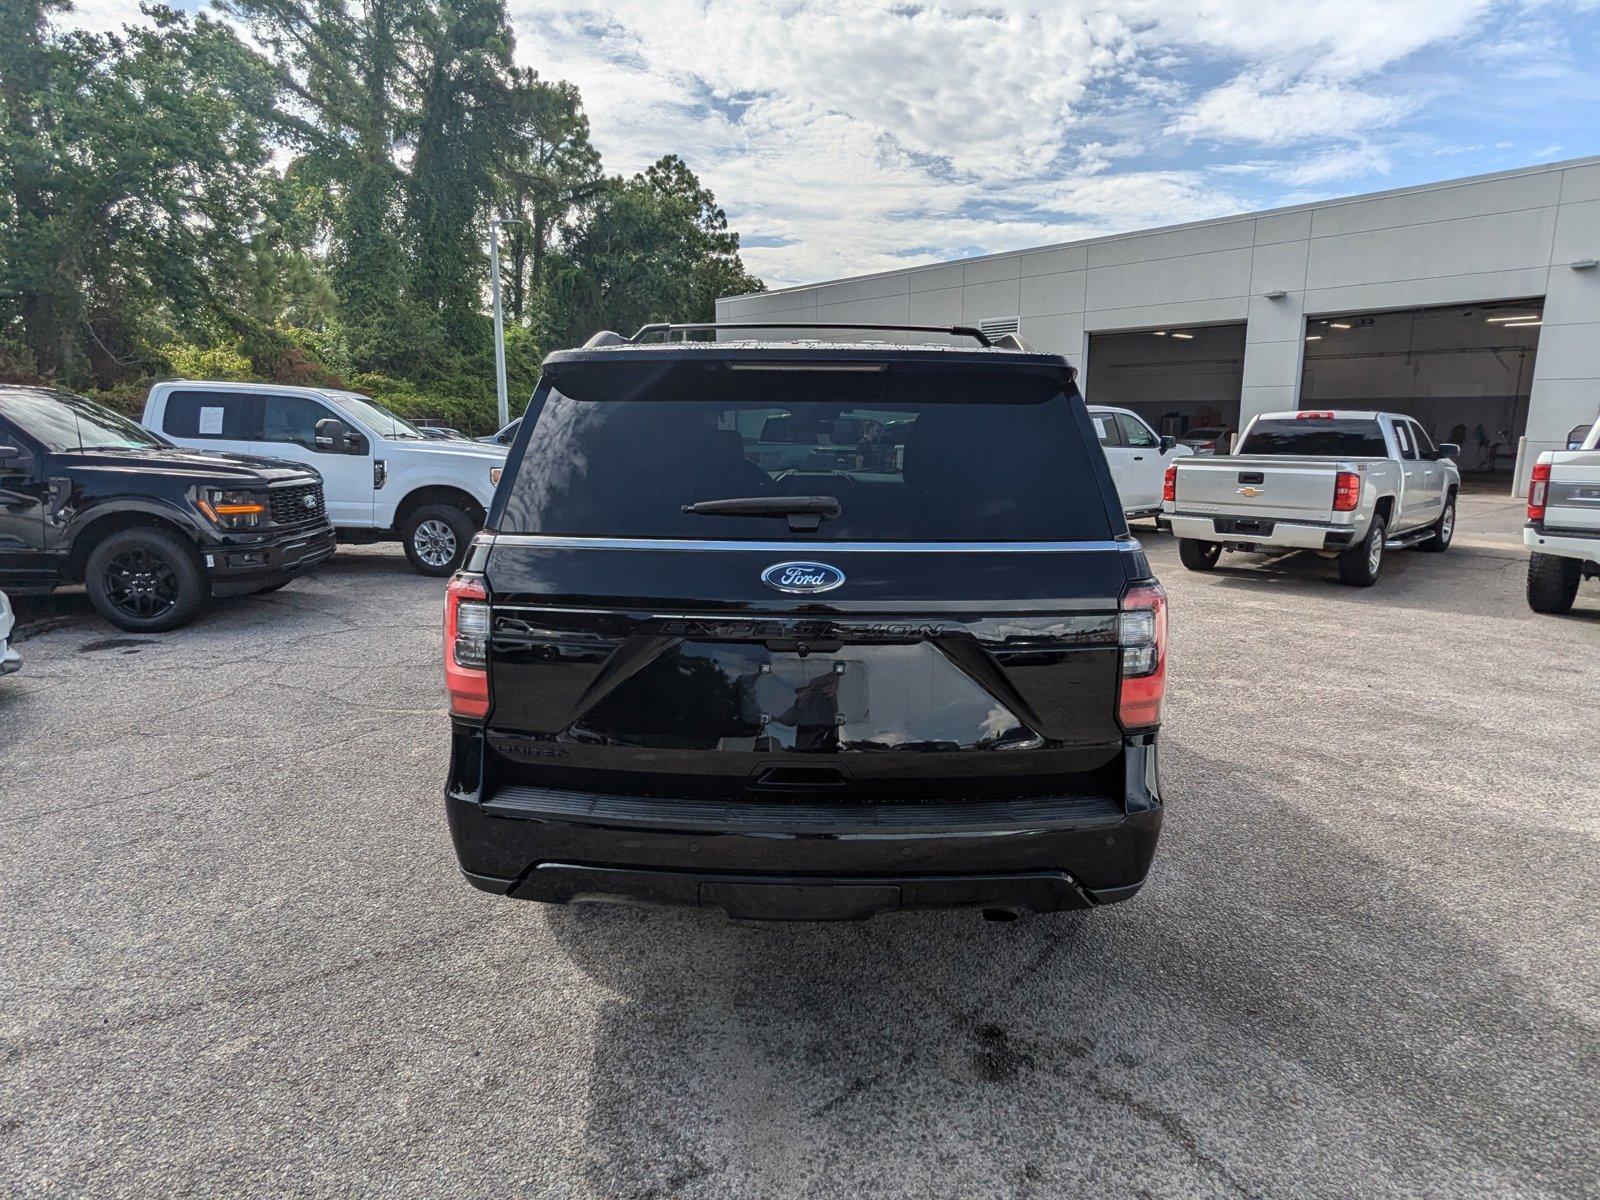 2020 Ford Expedition Vehicle Photo in Panama City, FL 32401